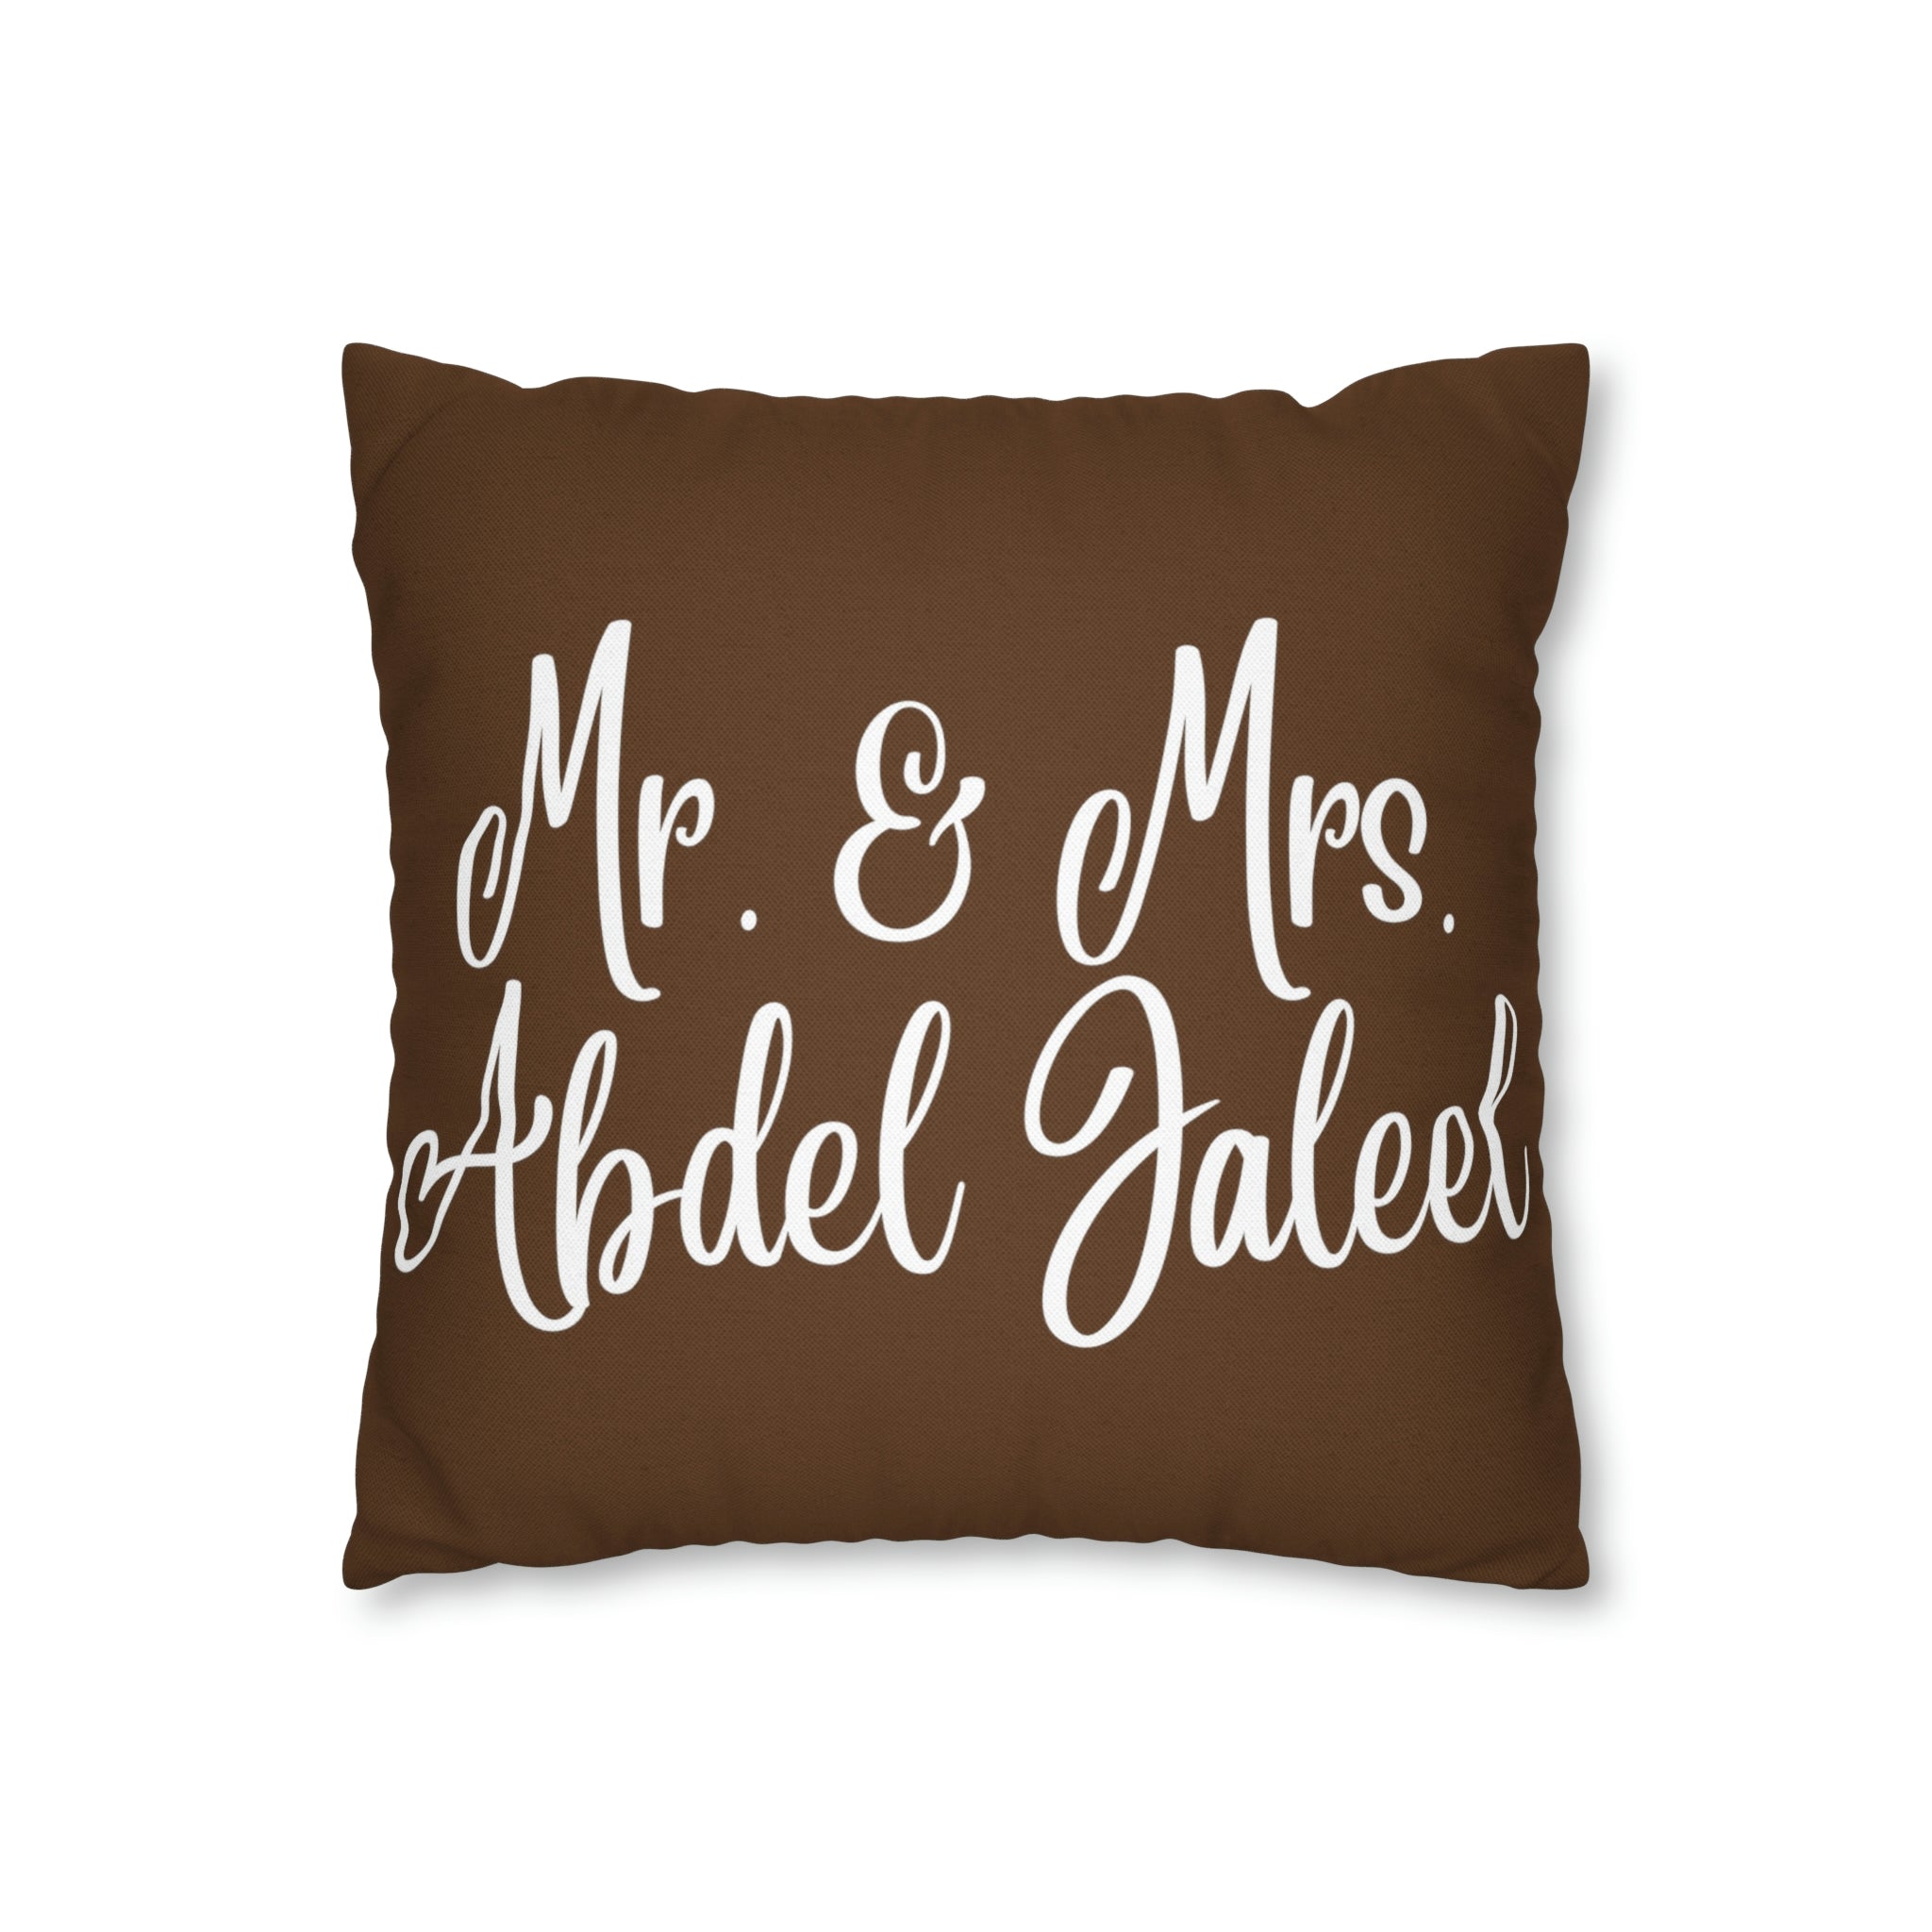 Personalized Pillow Case Spun Polyester Square Pillow Case (If you'd like another color or have different wording please just let me know) Throw Pillow Case Muslim Home Prayer Room Home Decor